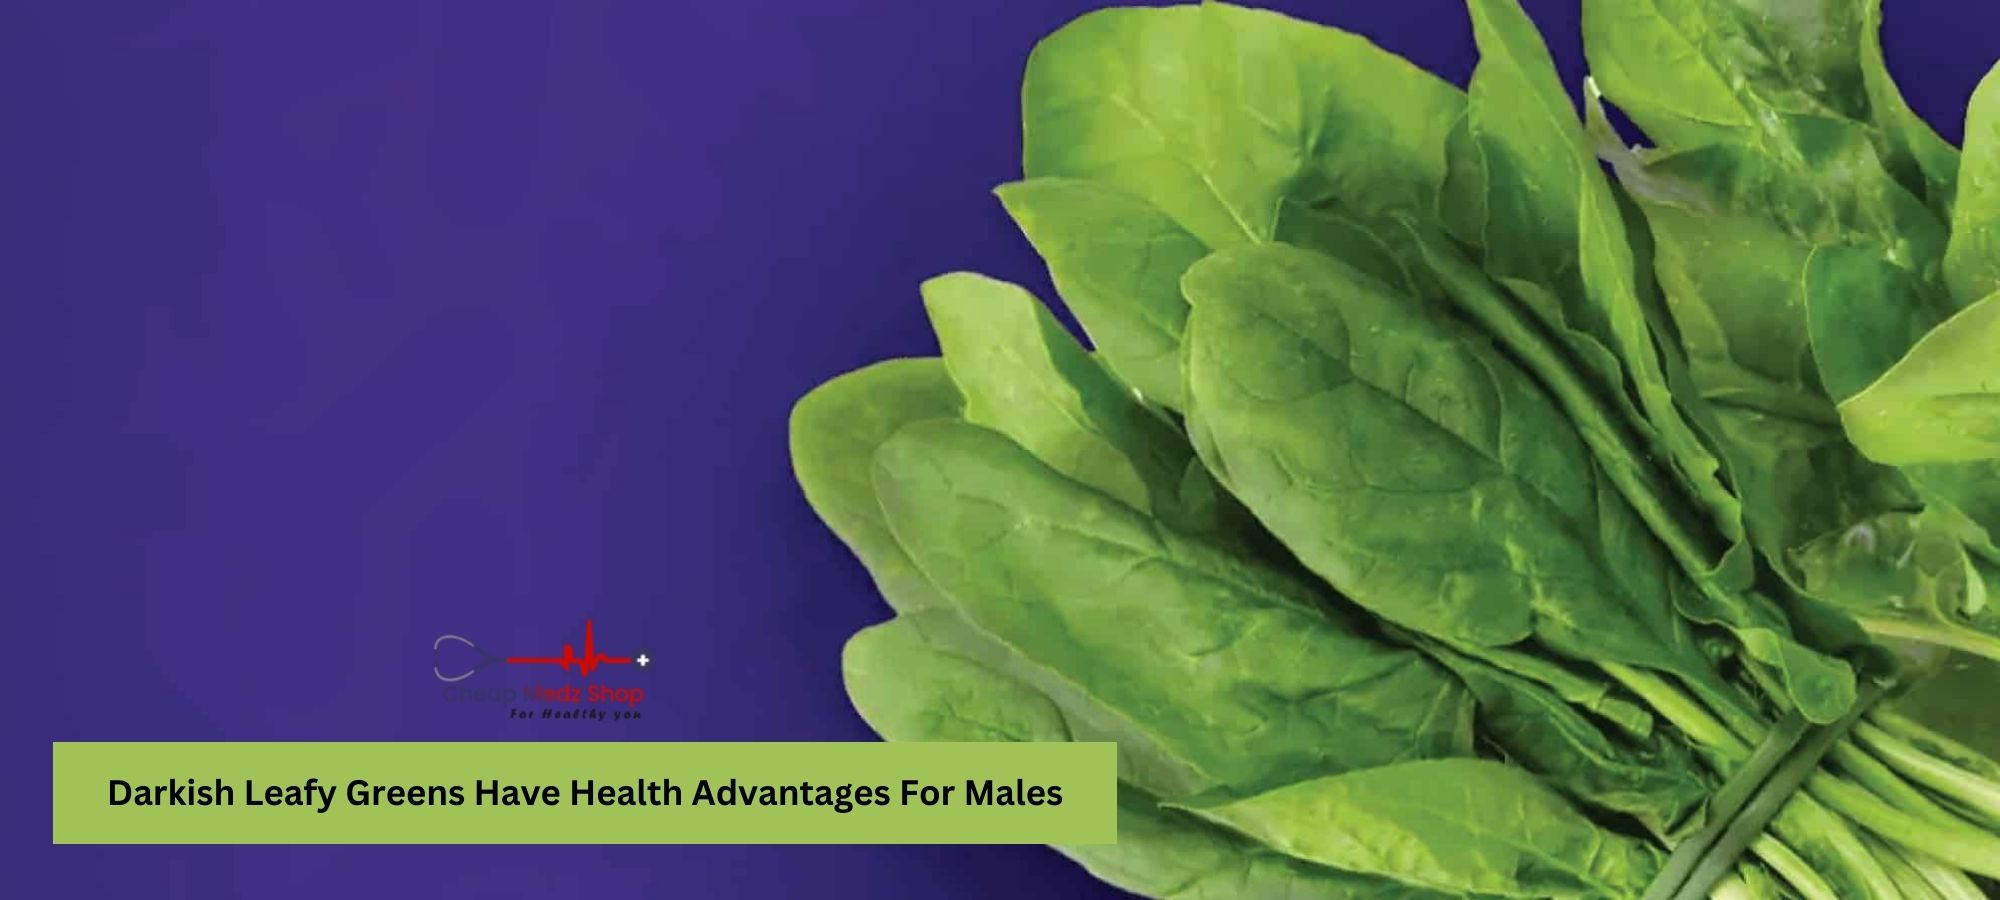 Darkish Leafy Greens Have Health Advantages For Males